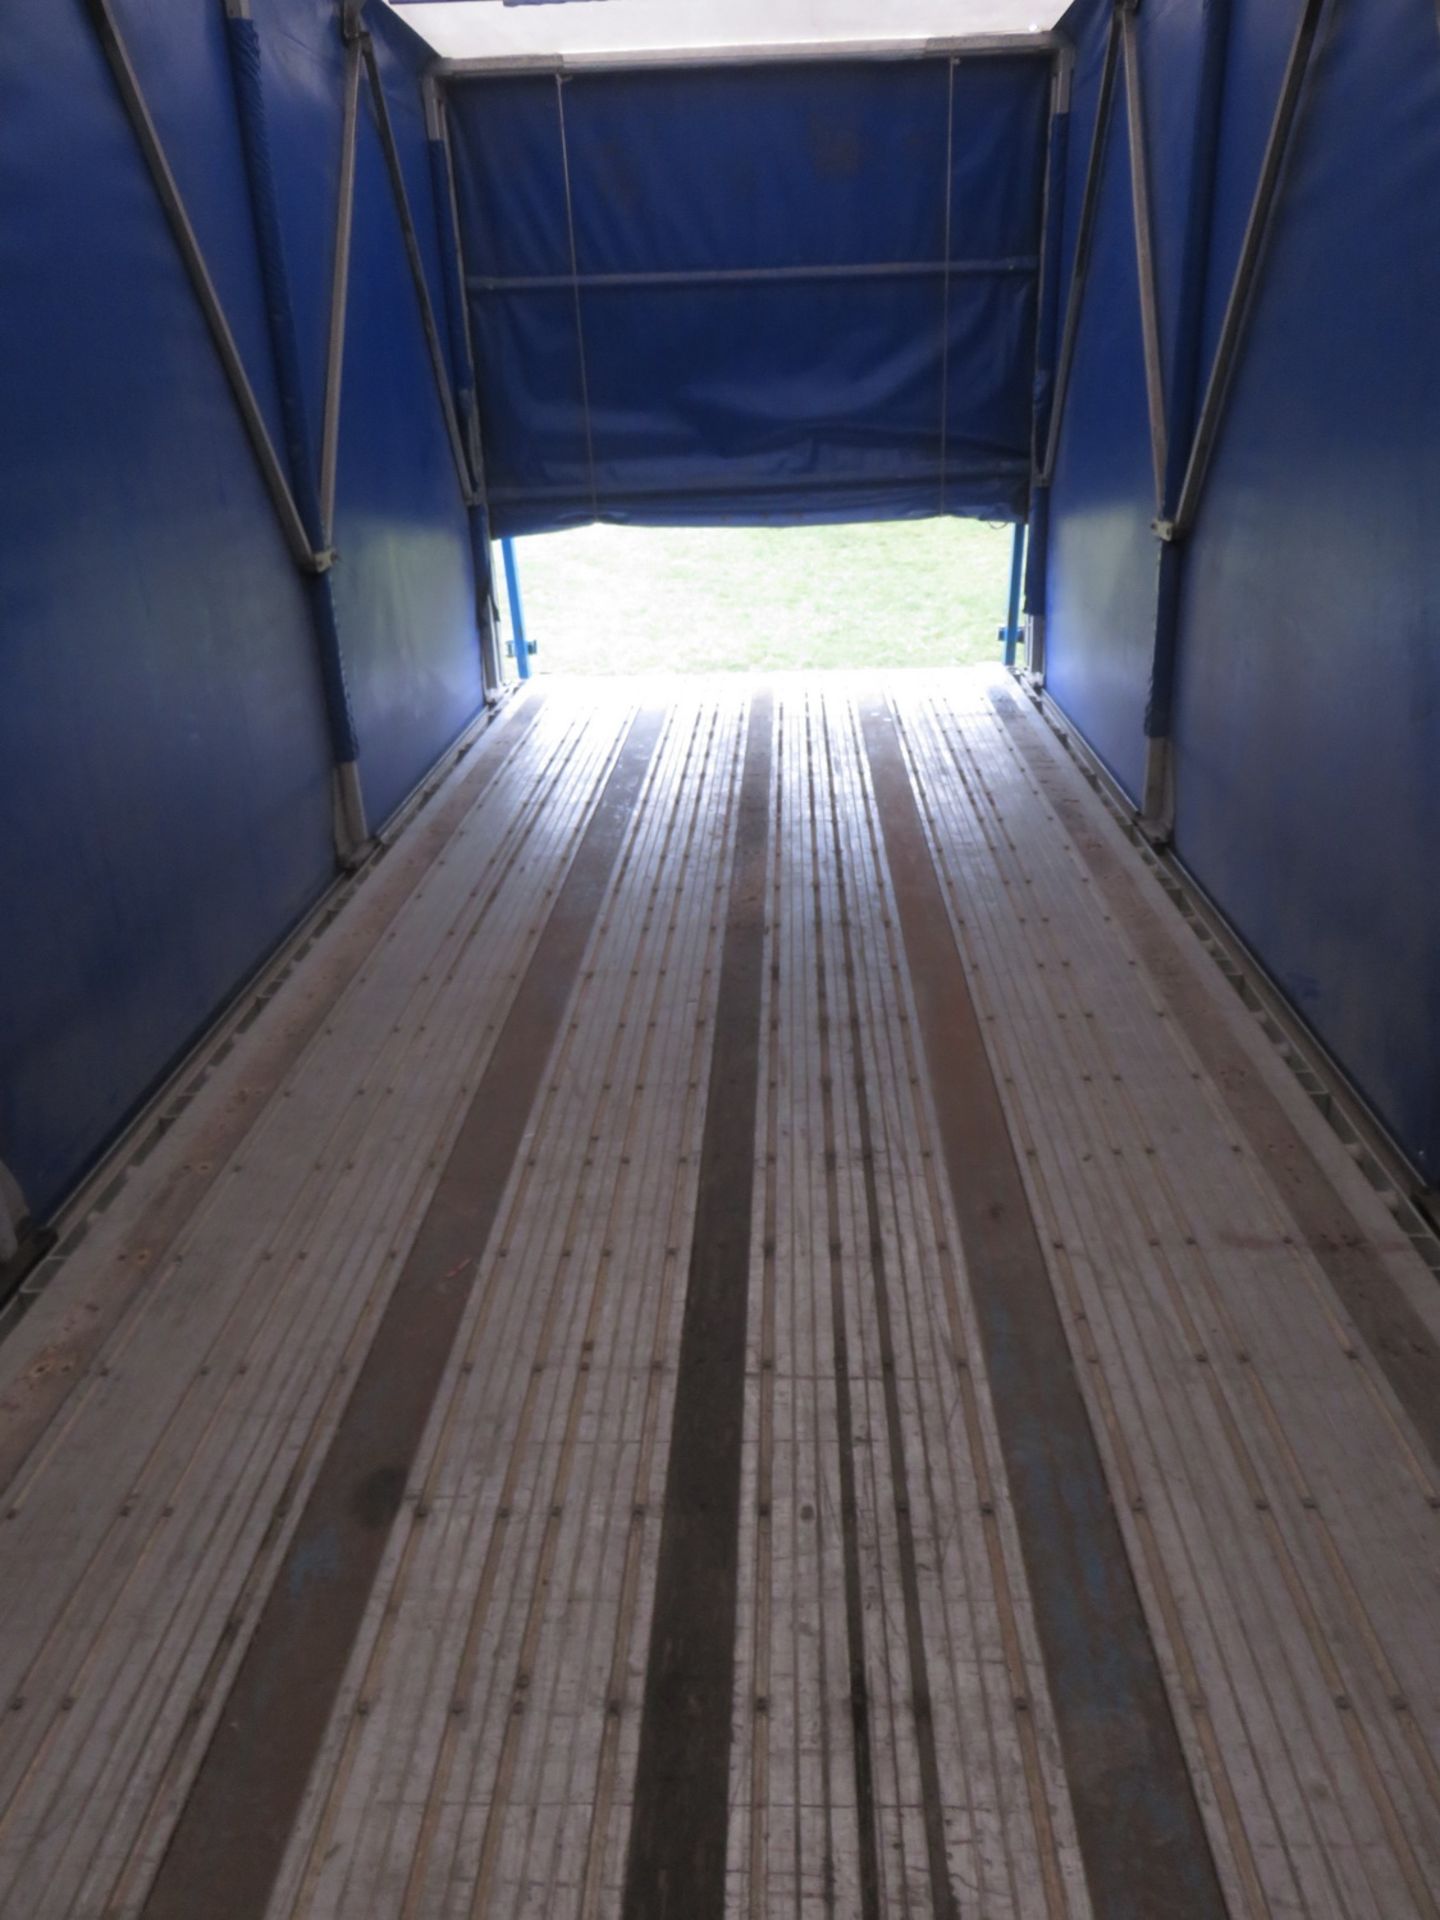 LODE KING 48' TANDEM AXLE BLUE CURTAIN SIDE TRAILER - S/N 2LDPA4829XC032084 - Image 2 of 6